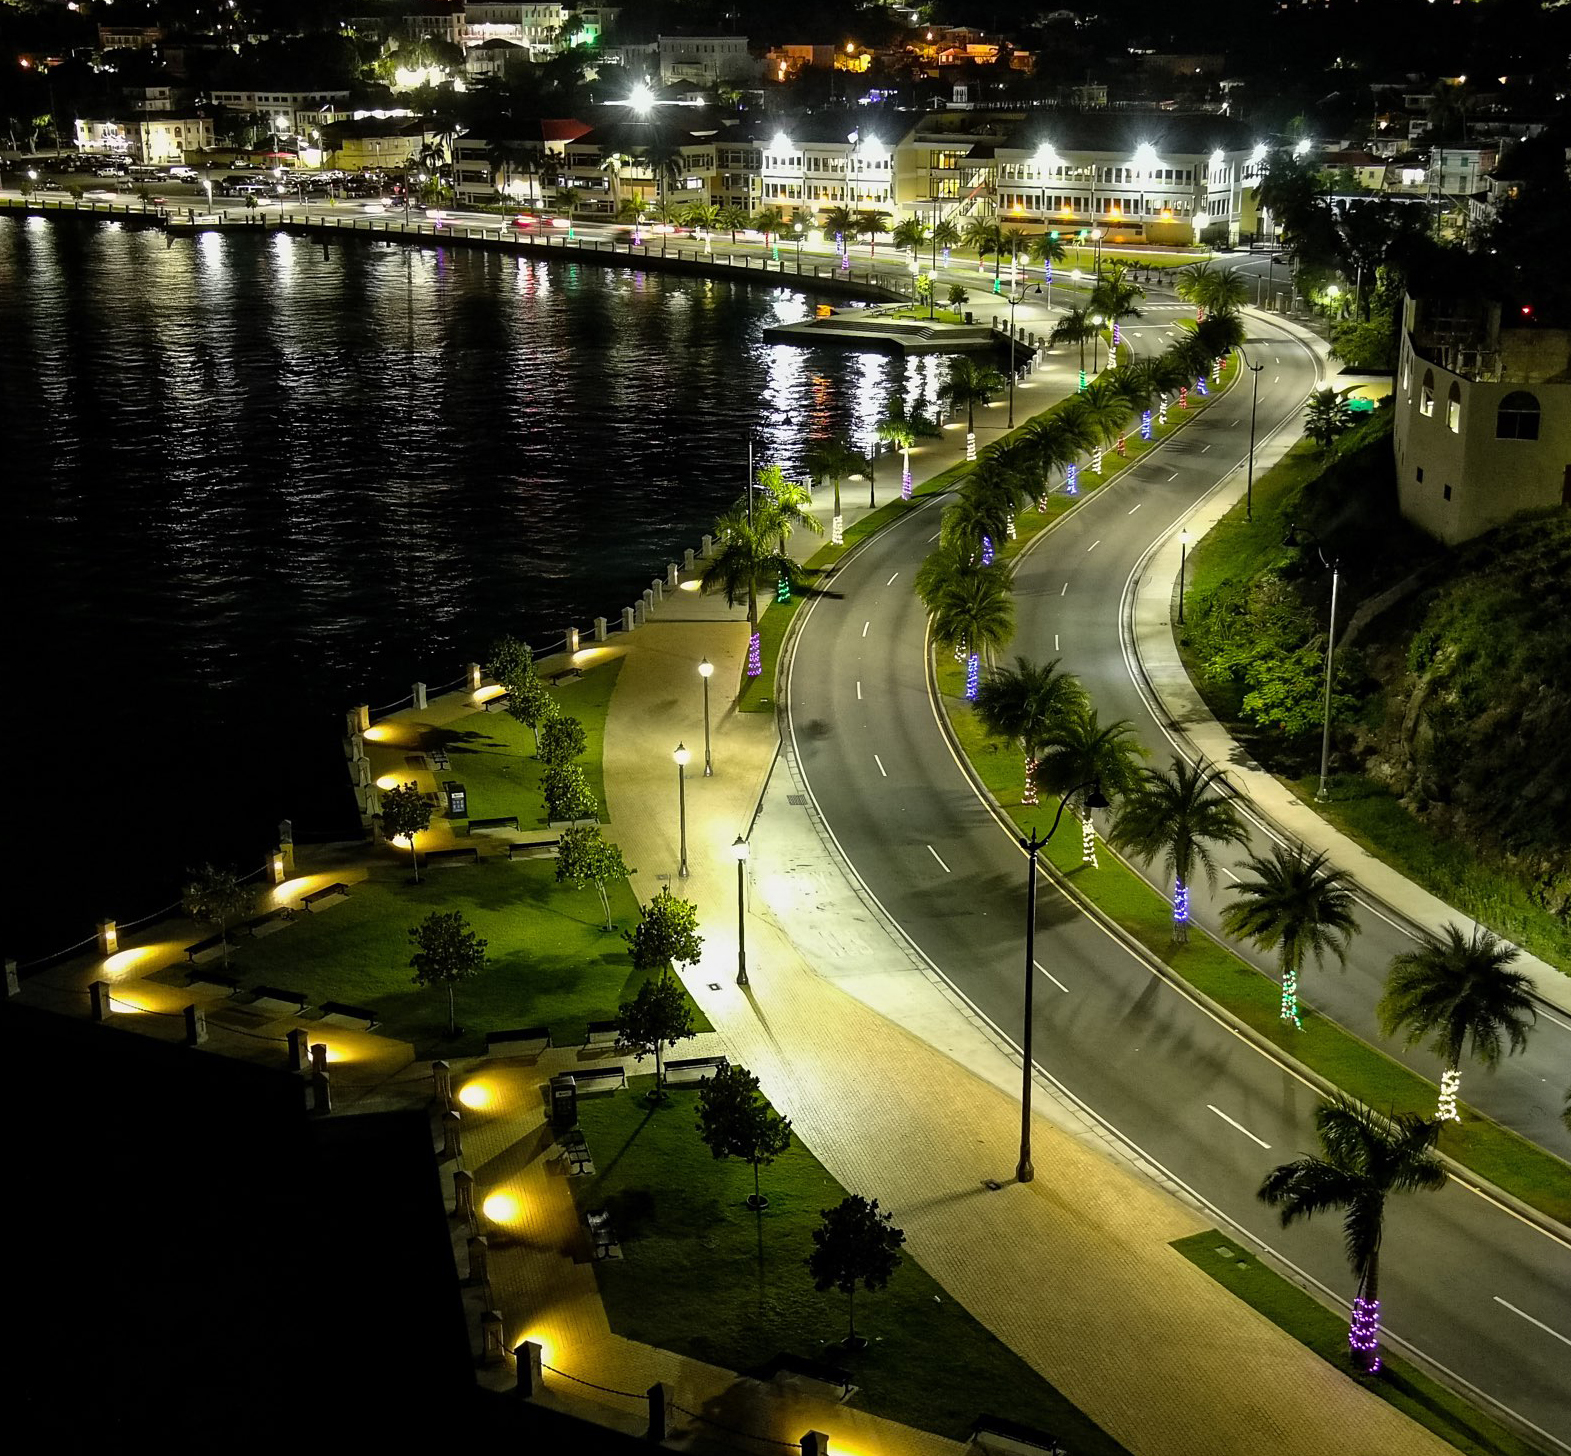 St. Thomas Waterfront Holiday Lights Dec 2022 Image From Nick Heinemann 